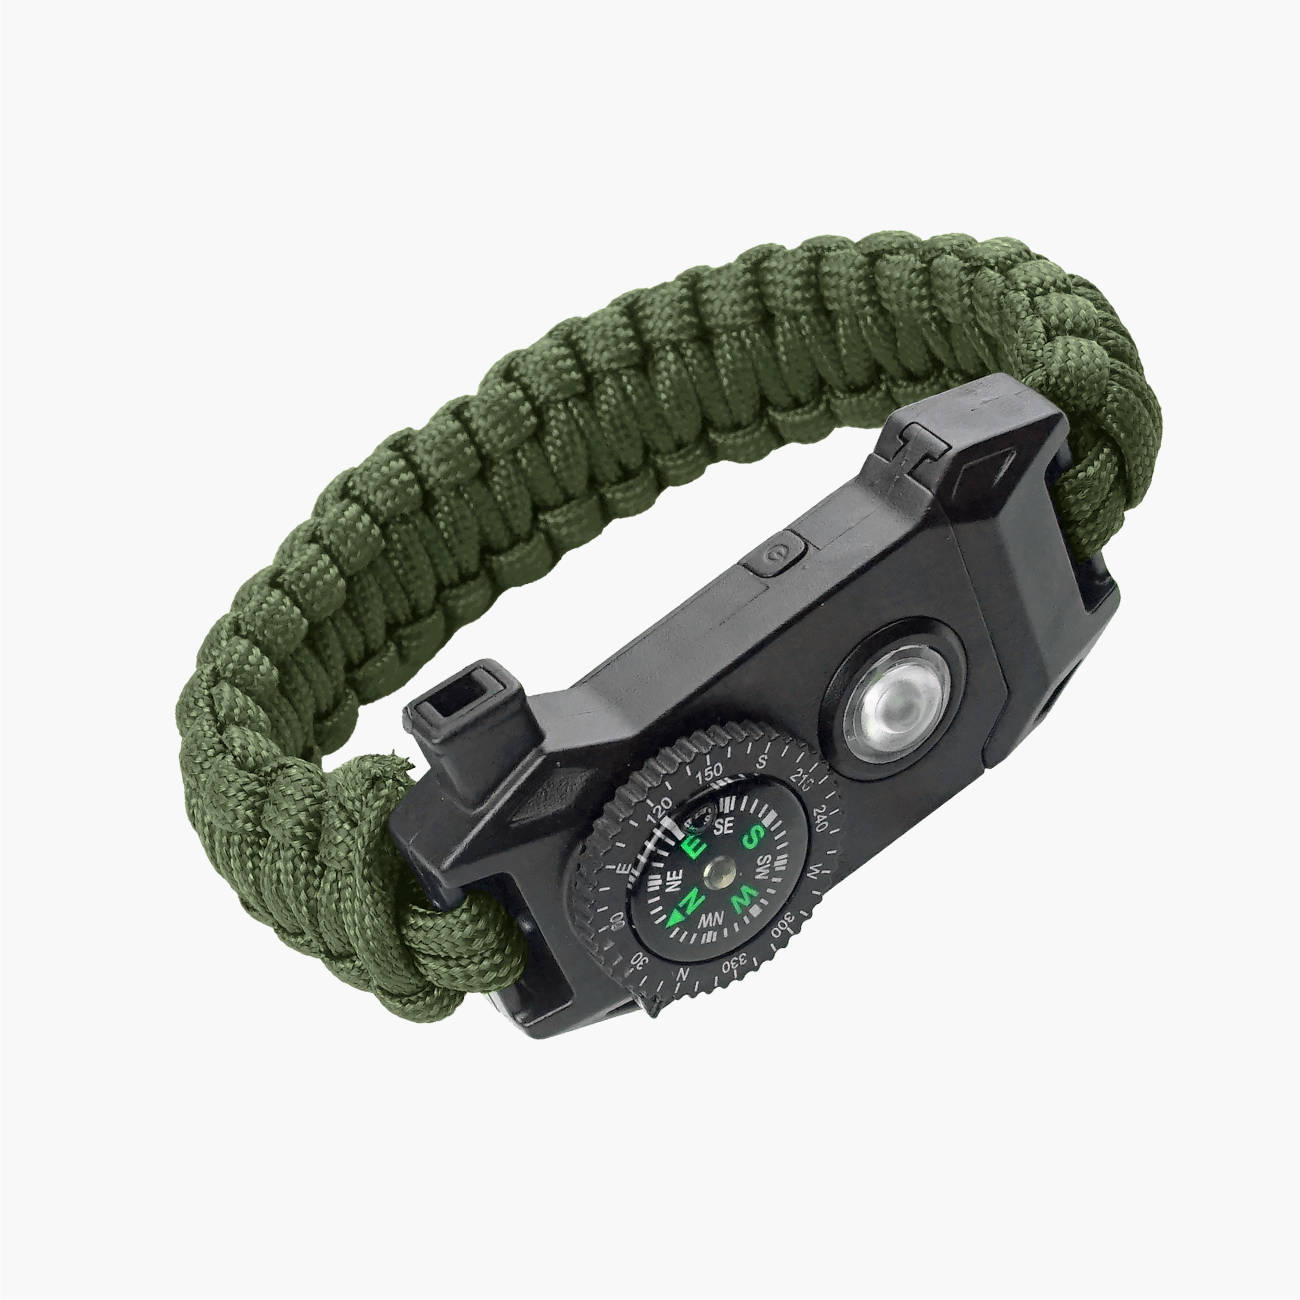 Paracord Bracelet with Fire Steel - 9 inch